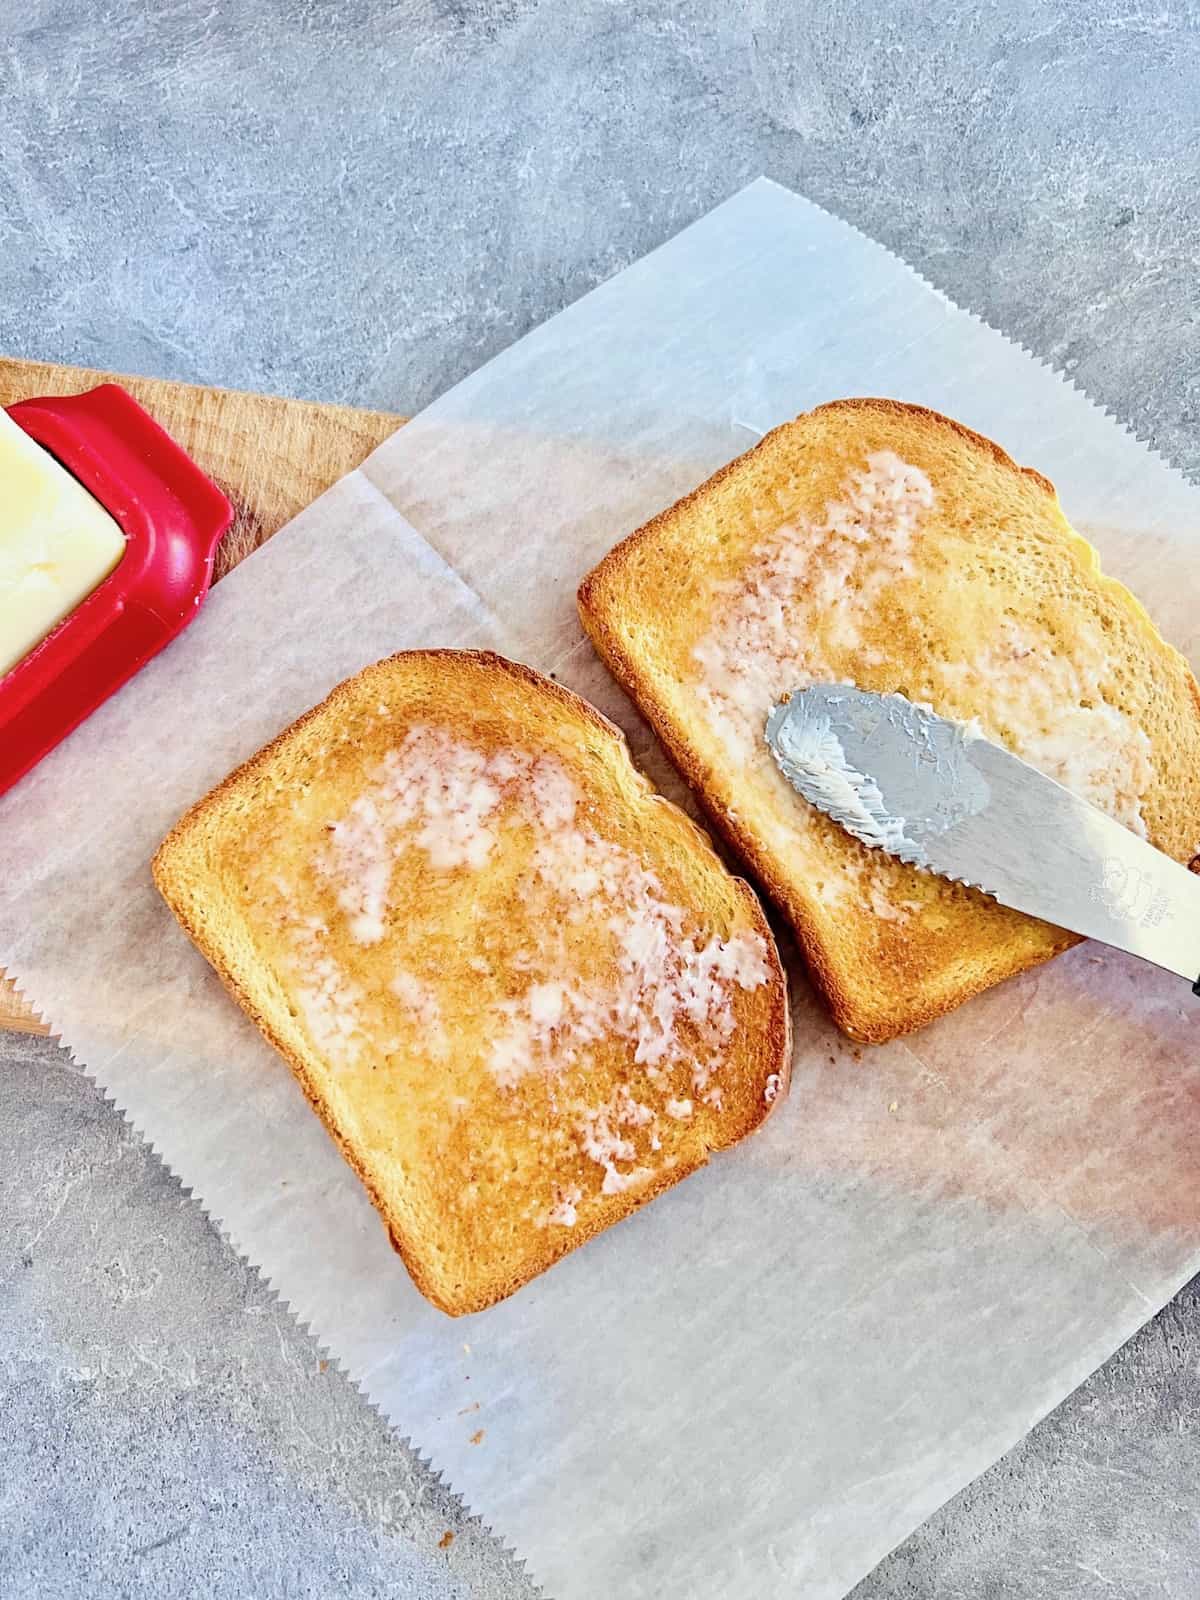 Buttering the toasted bread.